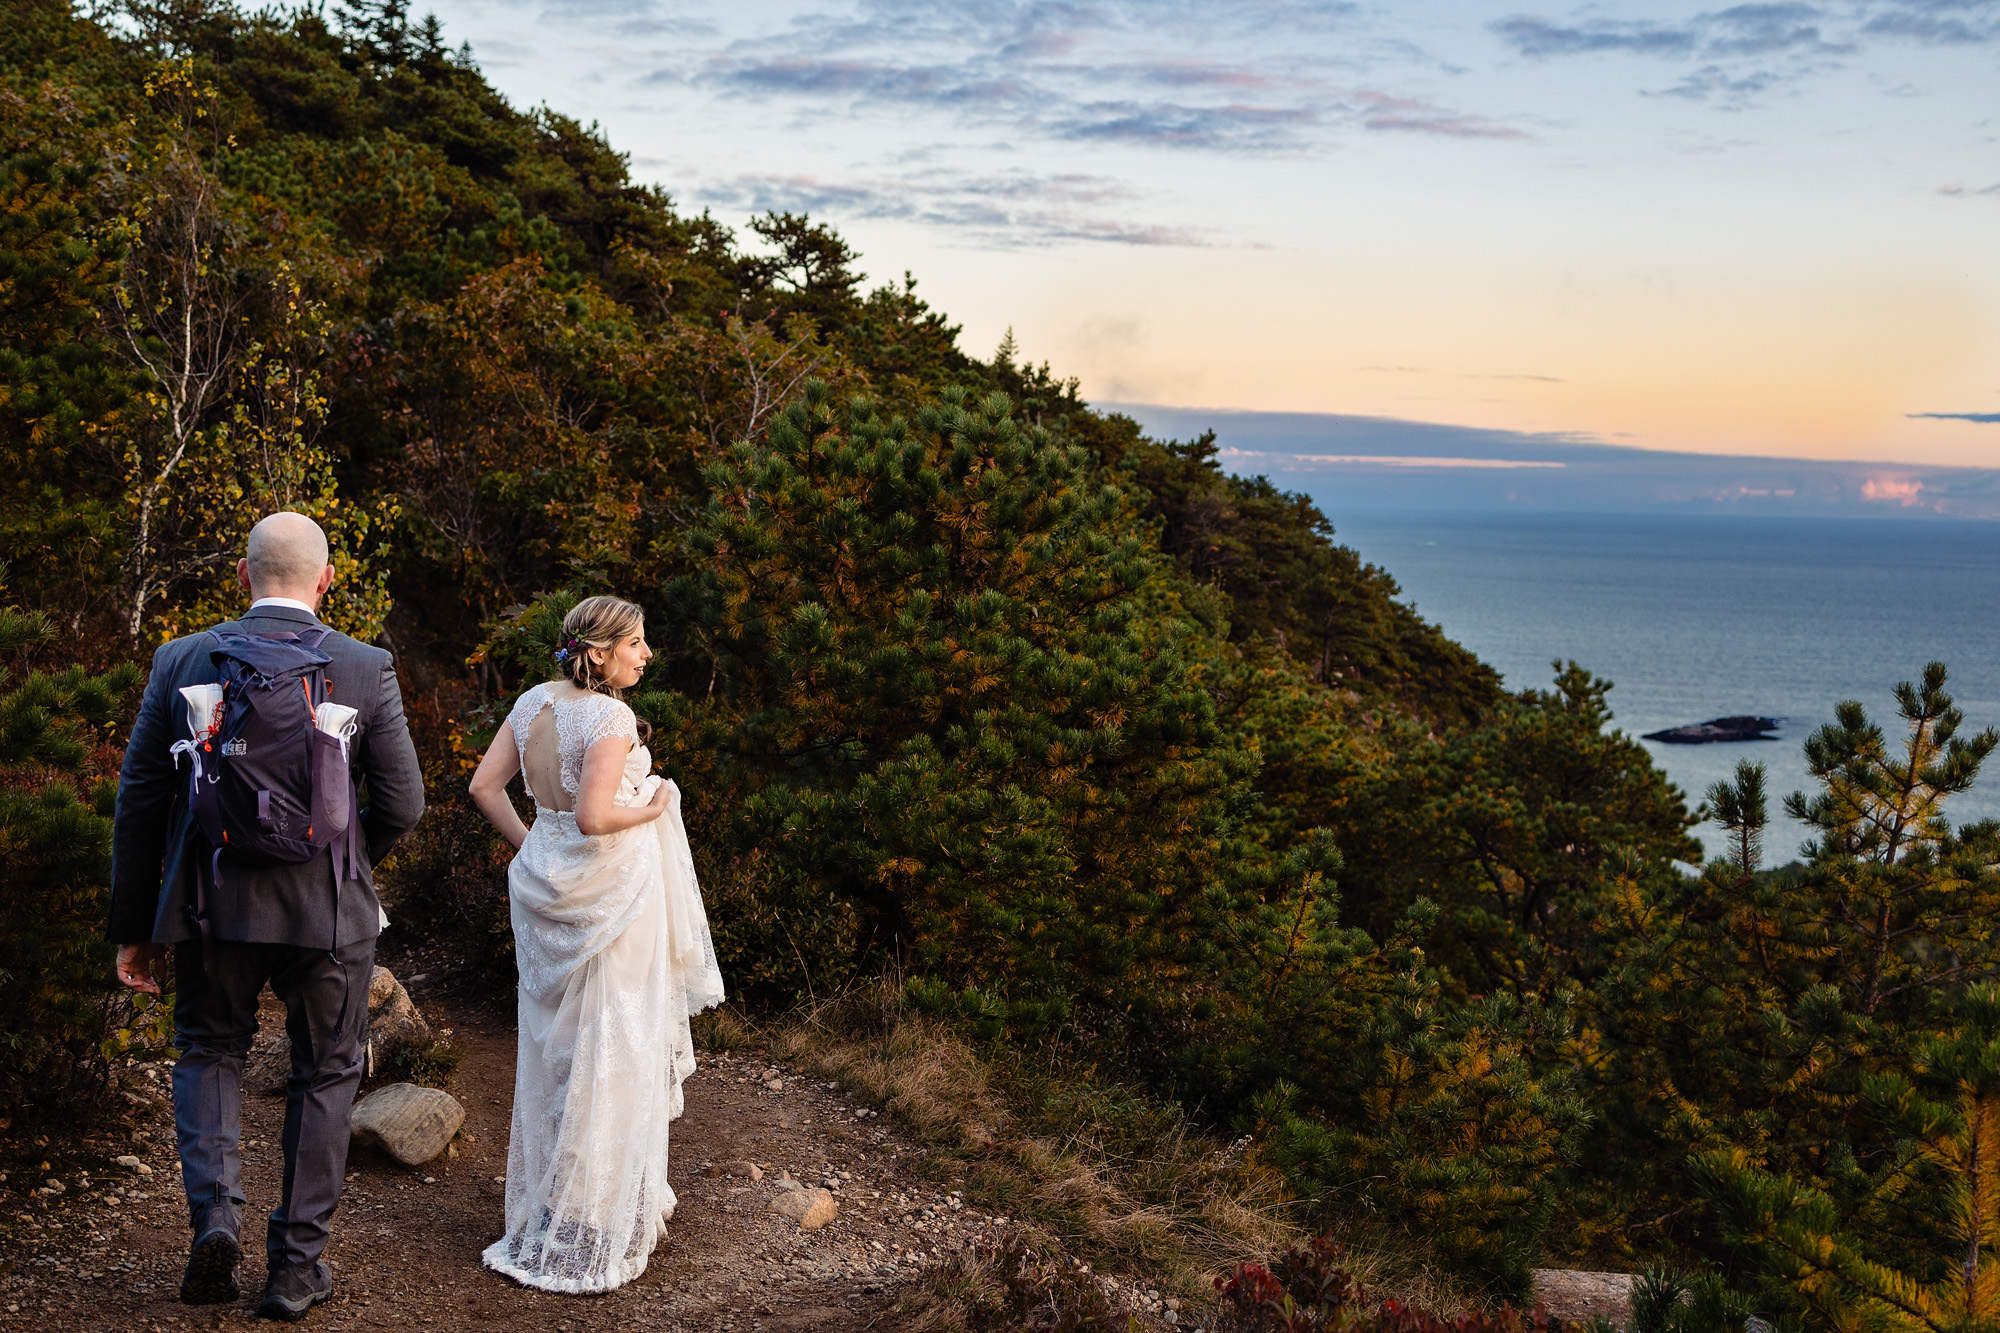 Elopement portraits on Beehive Mountain in Acadia National Park